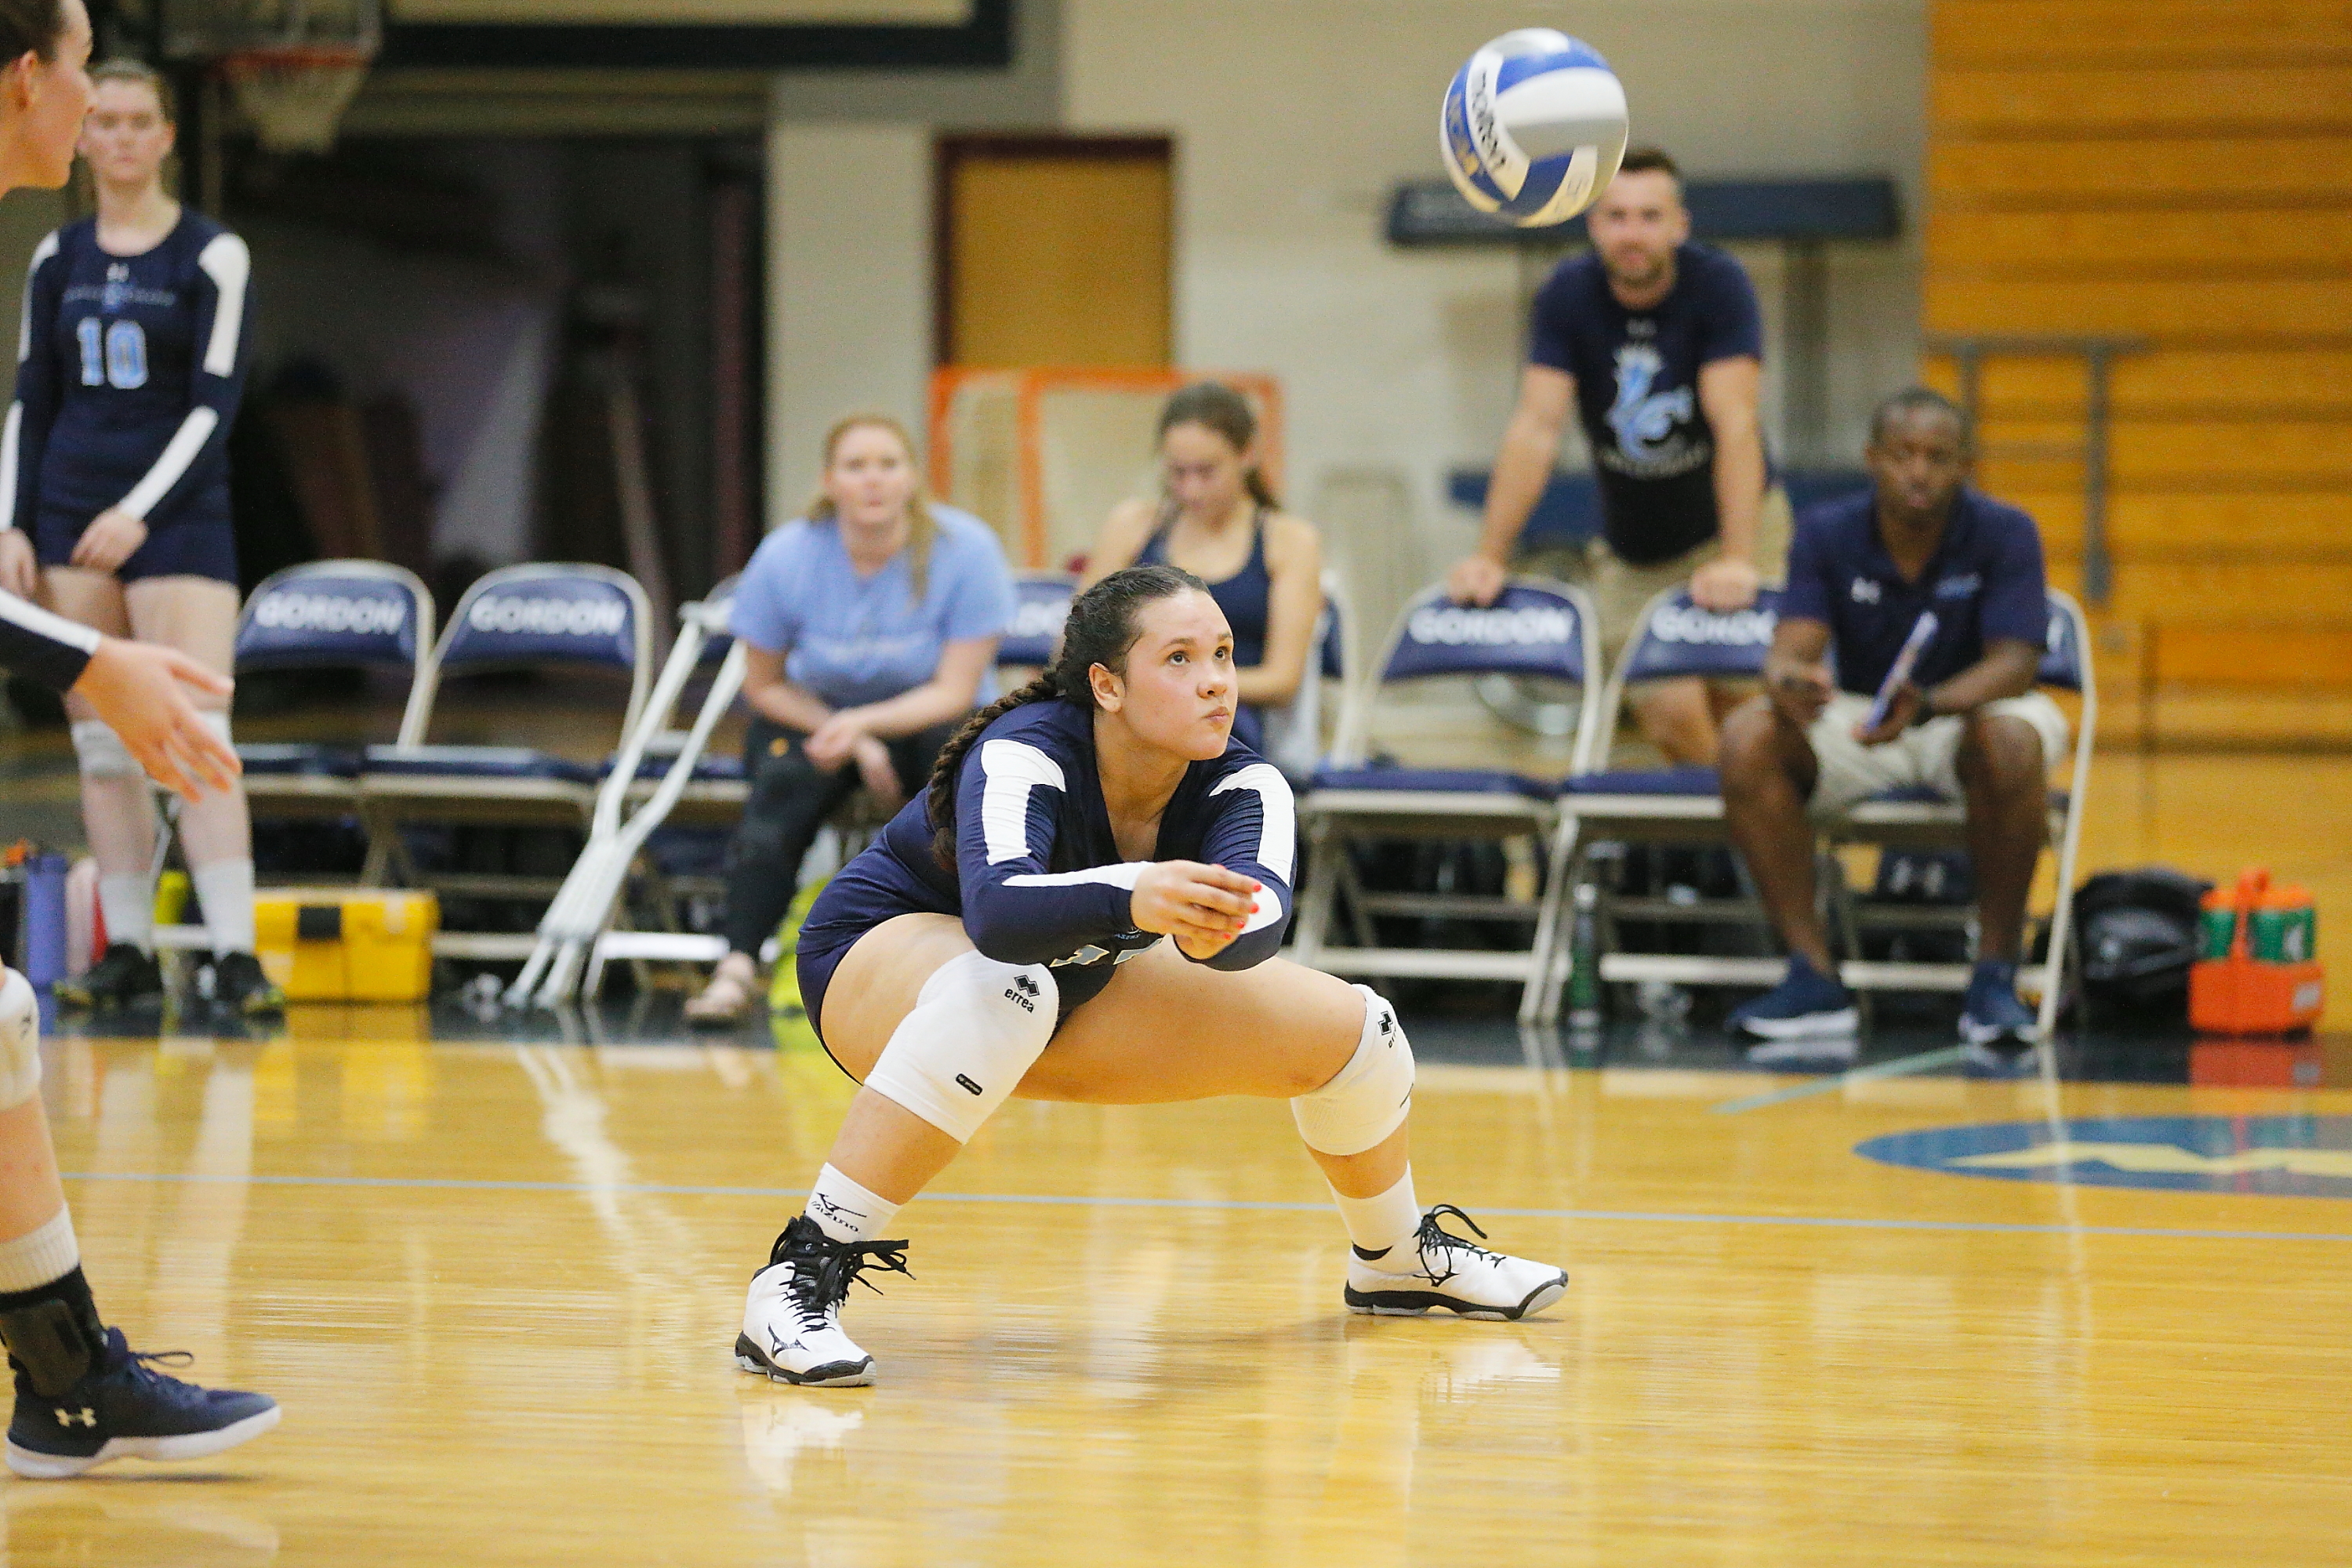 Gordon Drops Lasell in Women's Volleyball Action